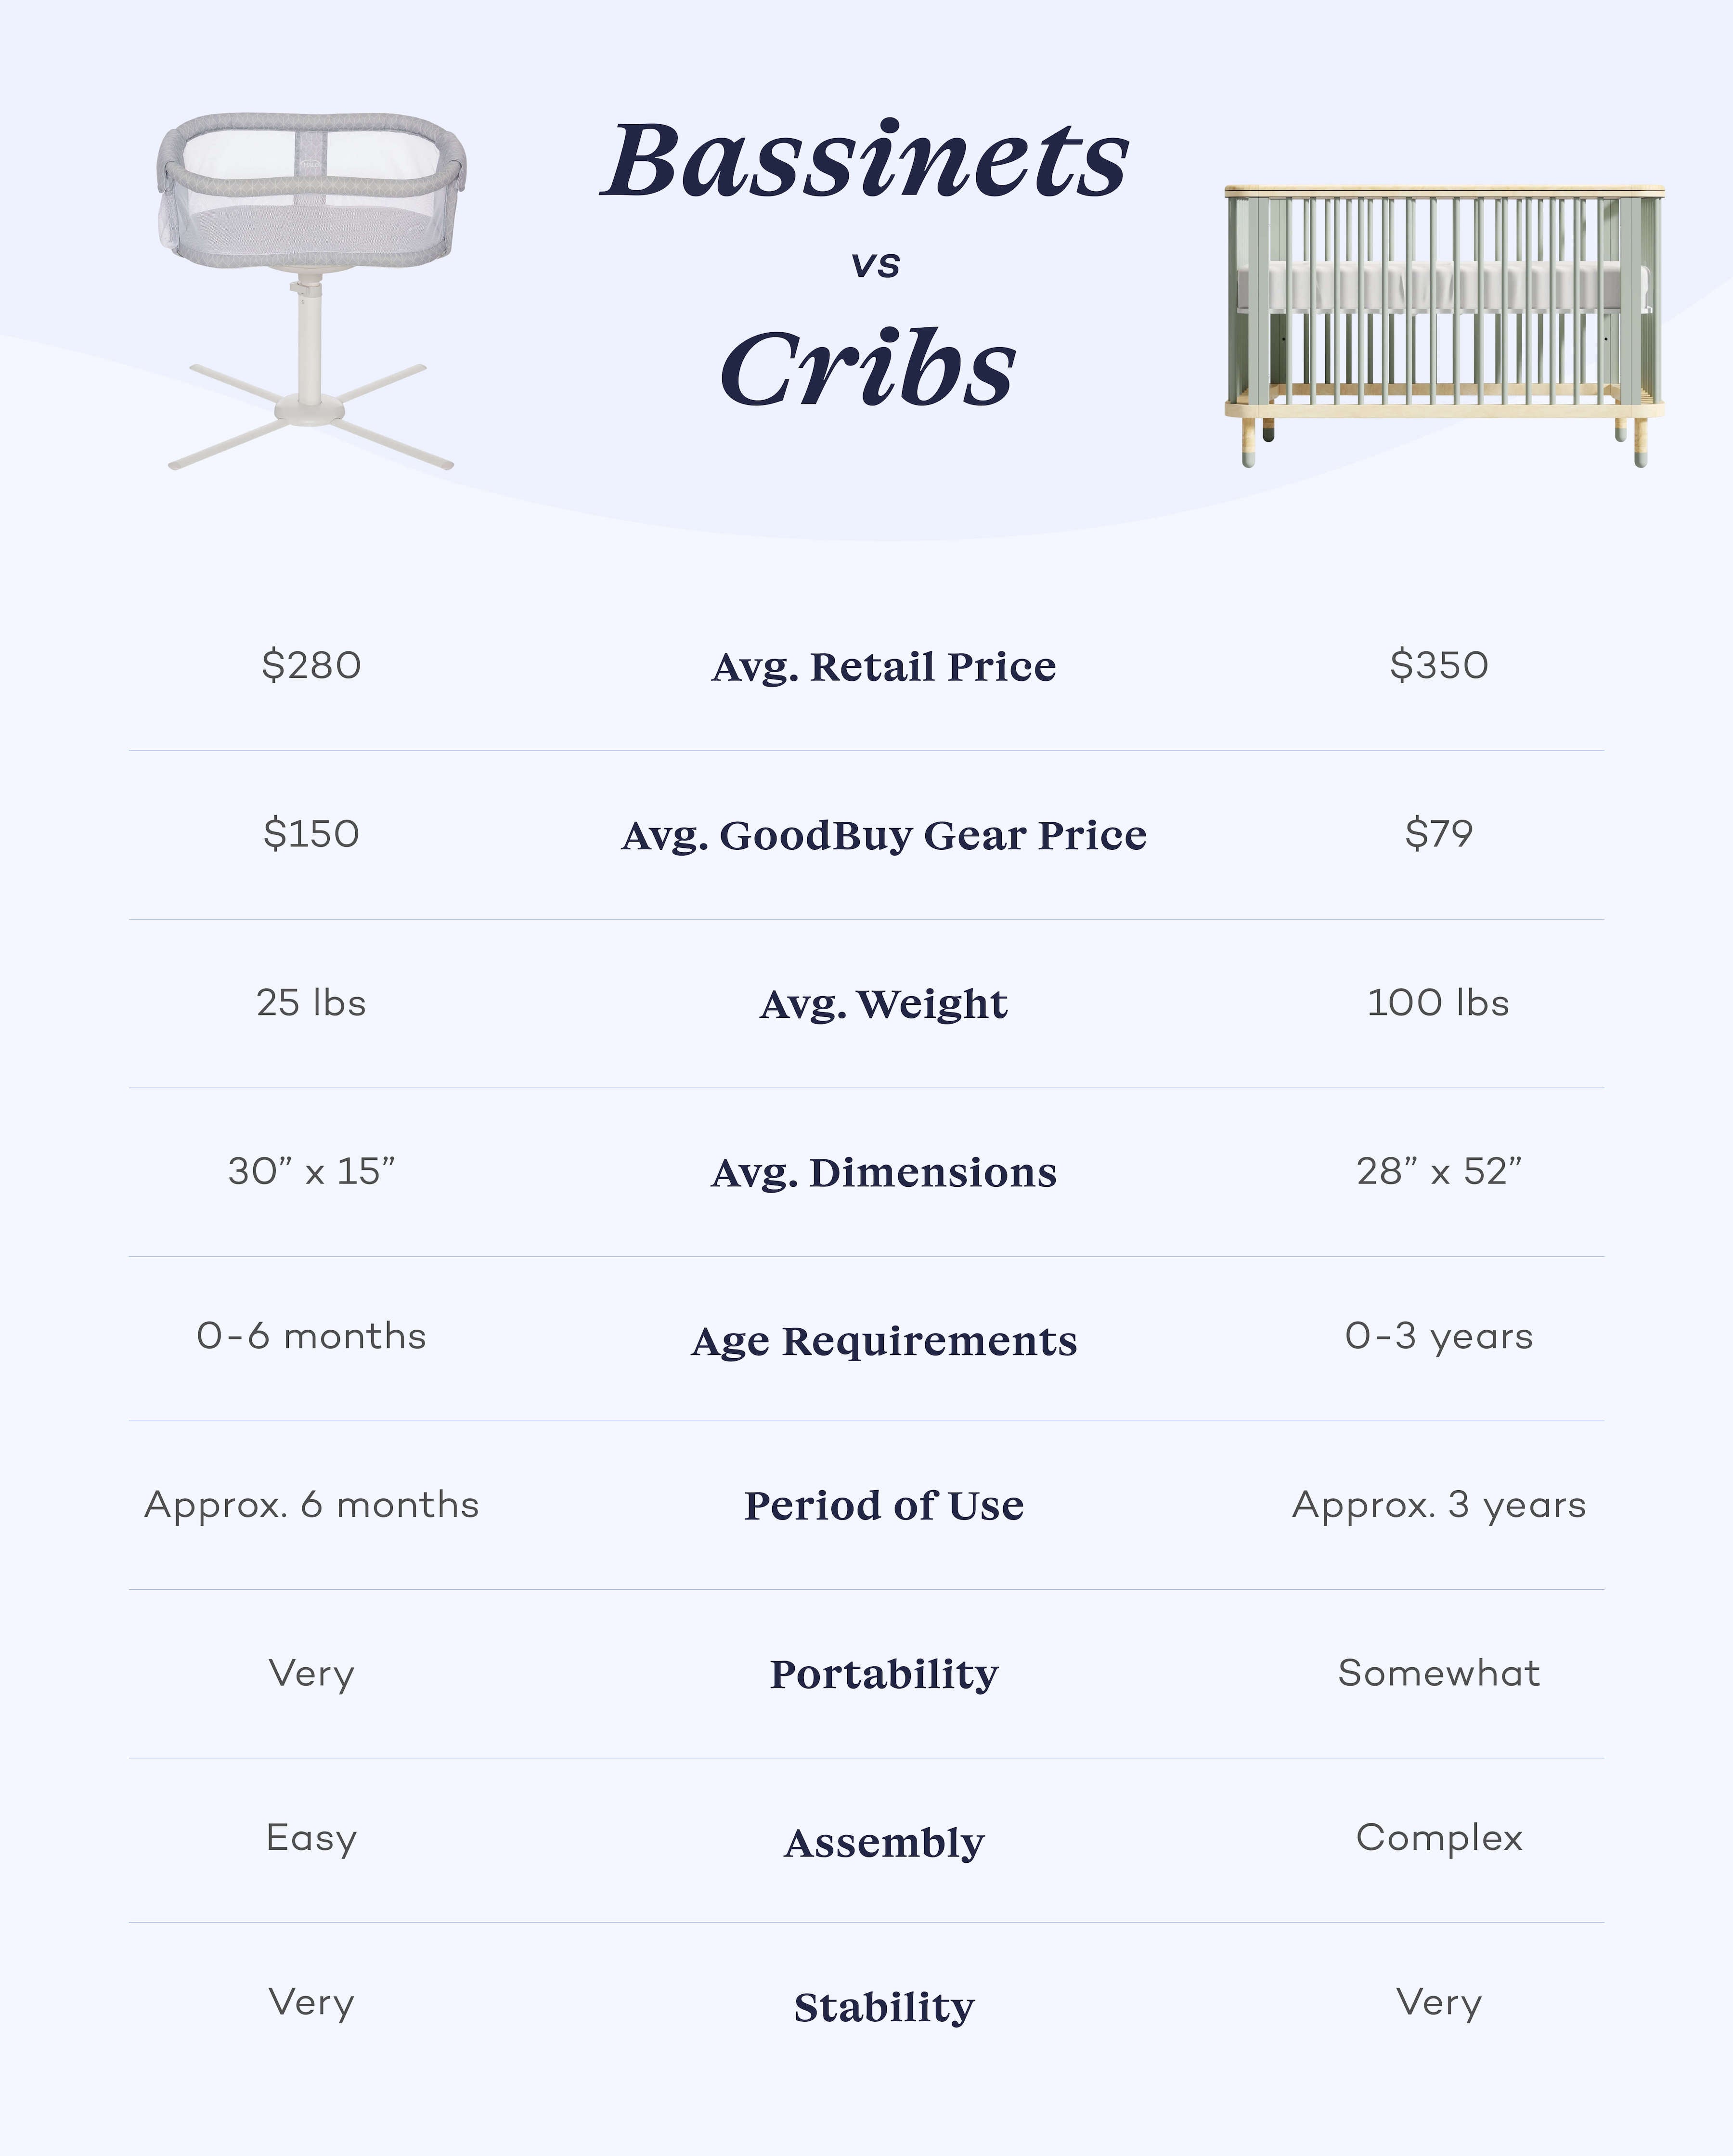 Understanding the difference between a baby bed, cot and bassinet